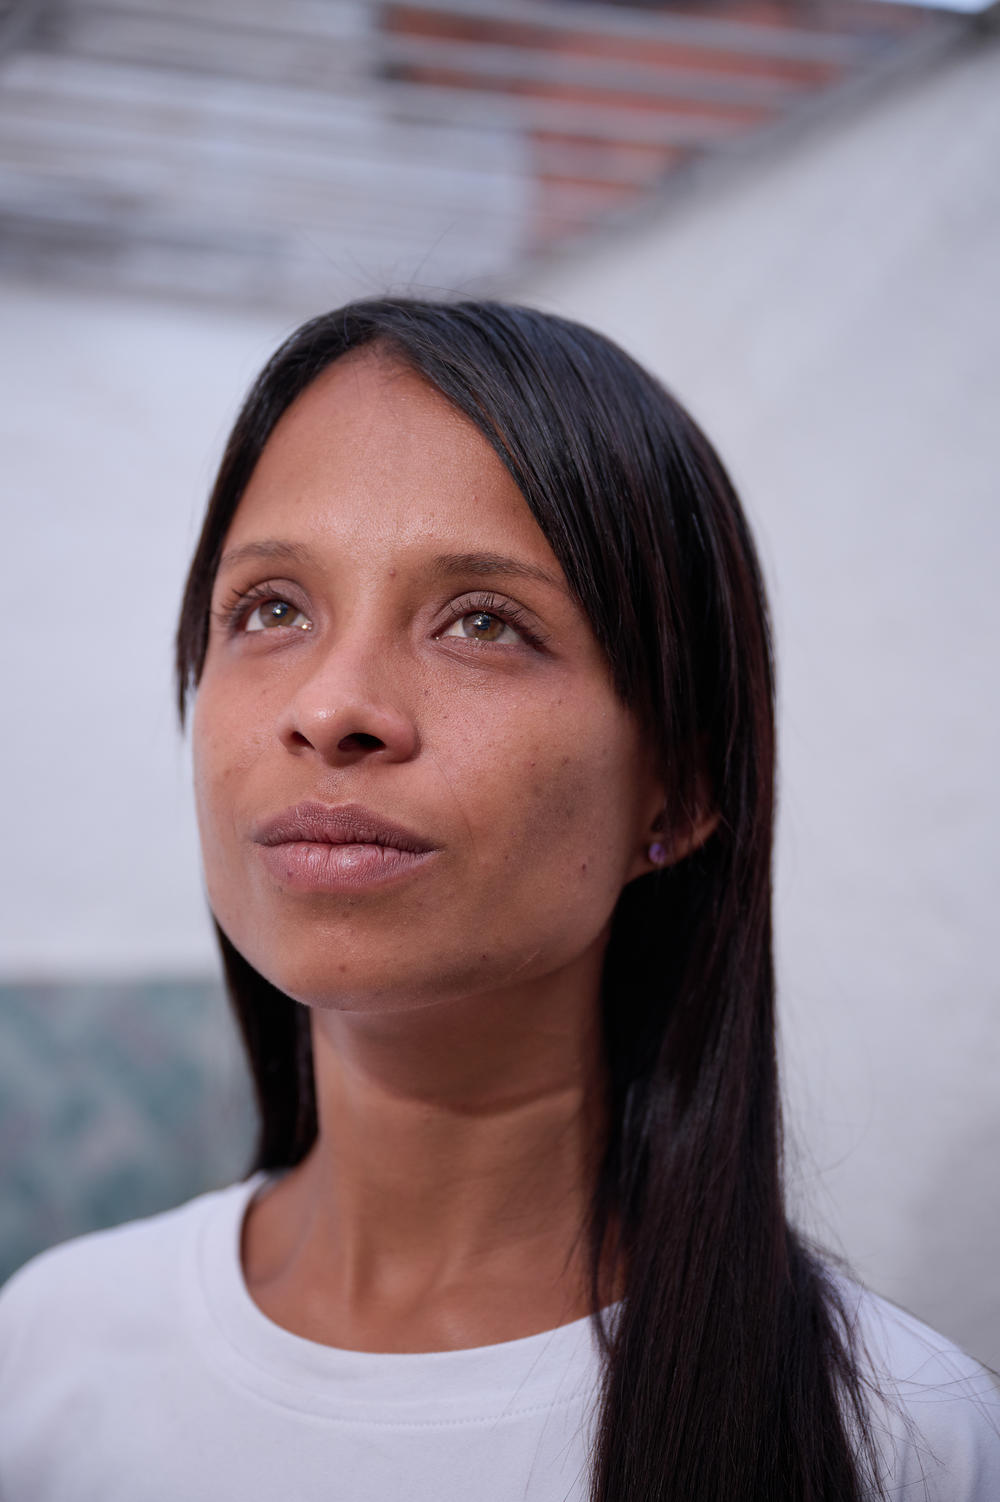 Livia Gonzalez poses for a portrait on the terrace of Casa in Medellín. Livia has been traveling to and from Colombia for the past few years working odd jobs to send back to her family in Caracas.